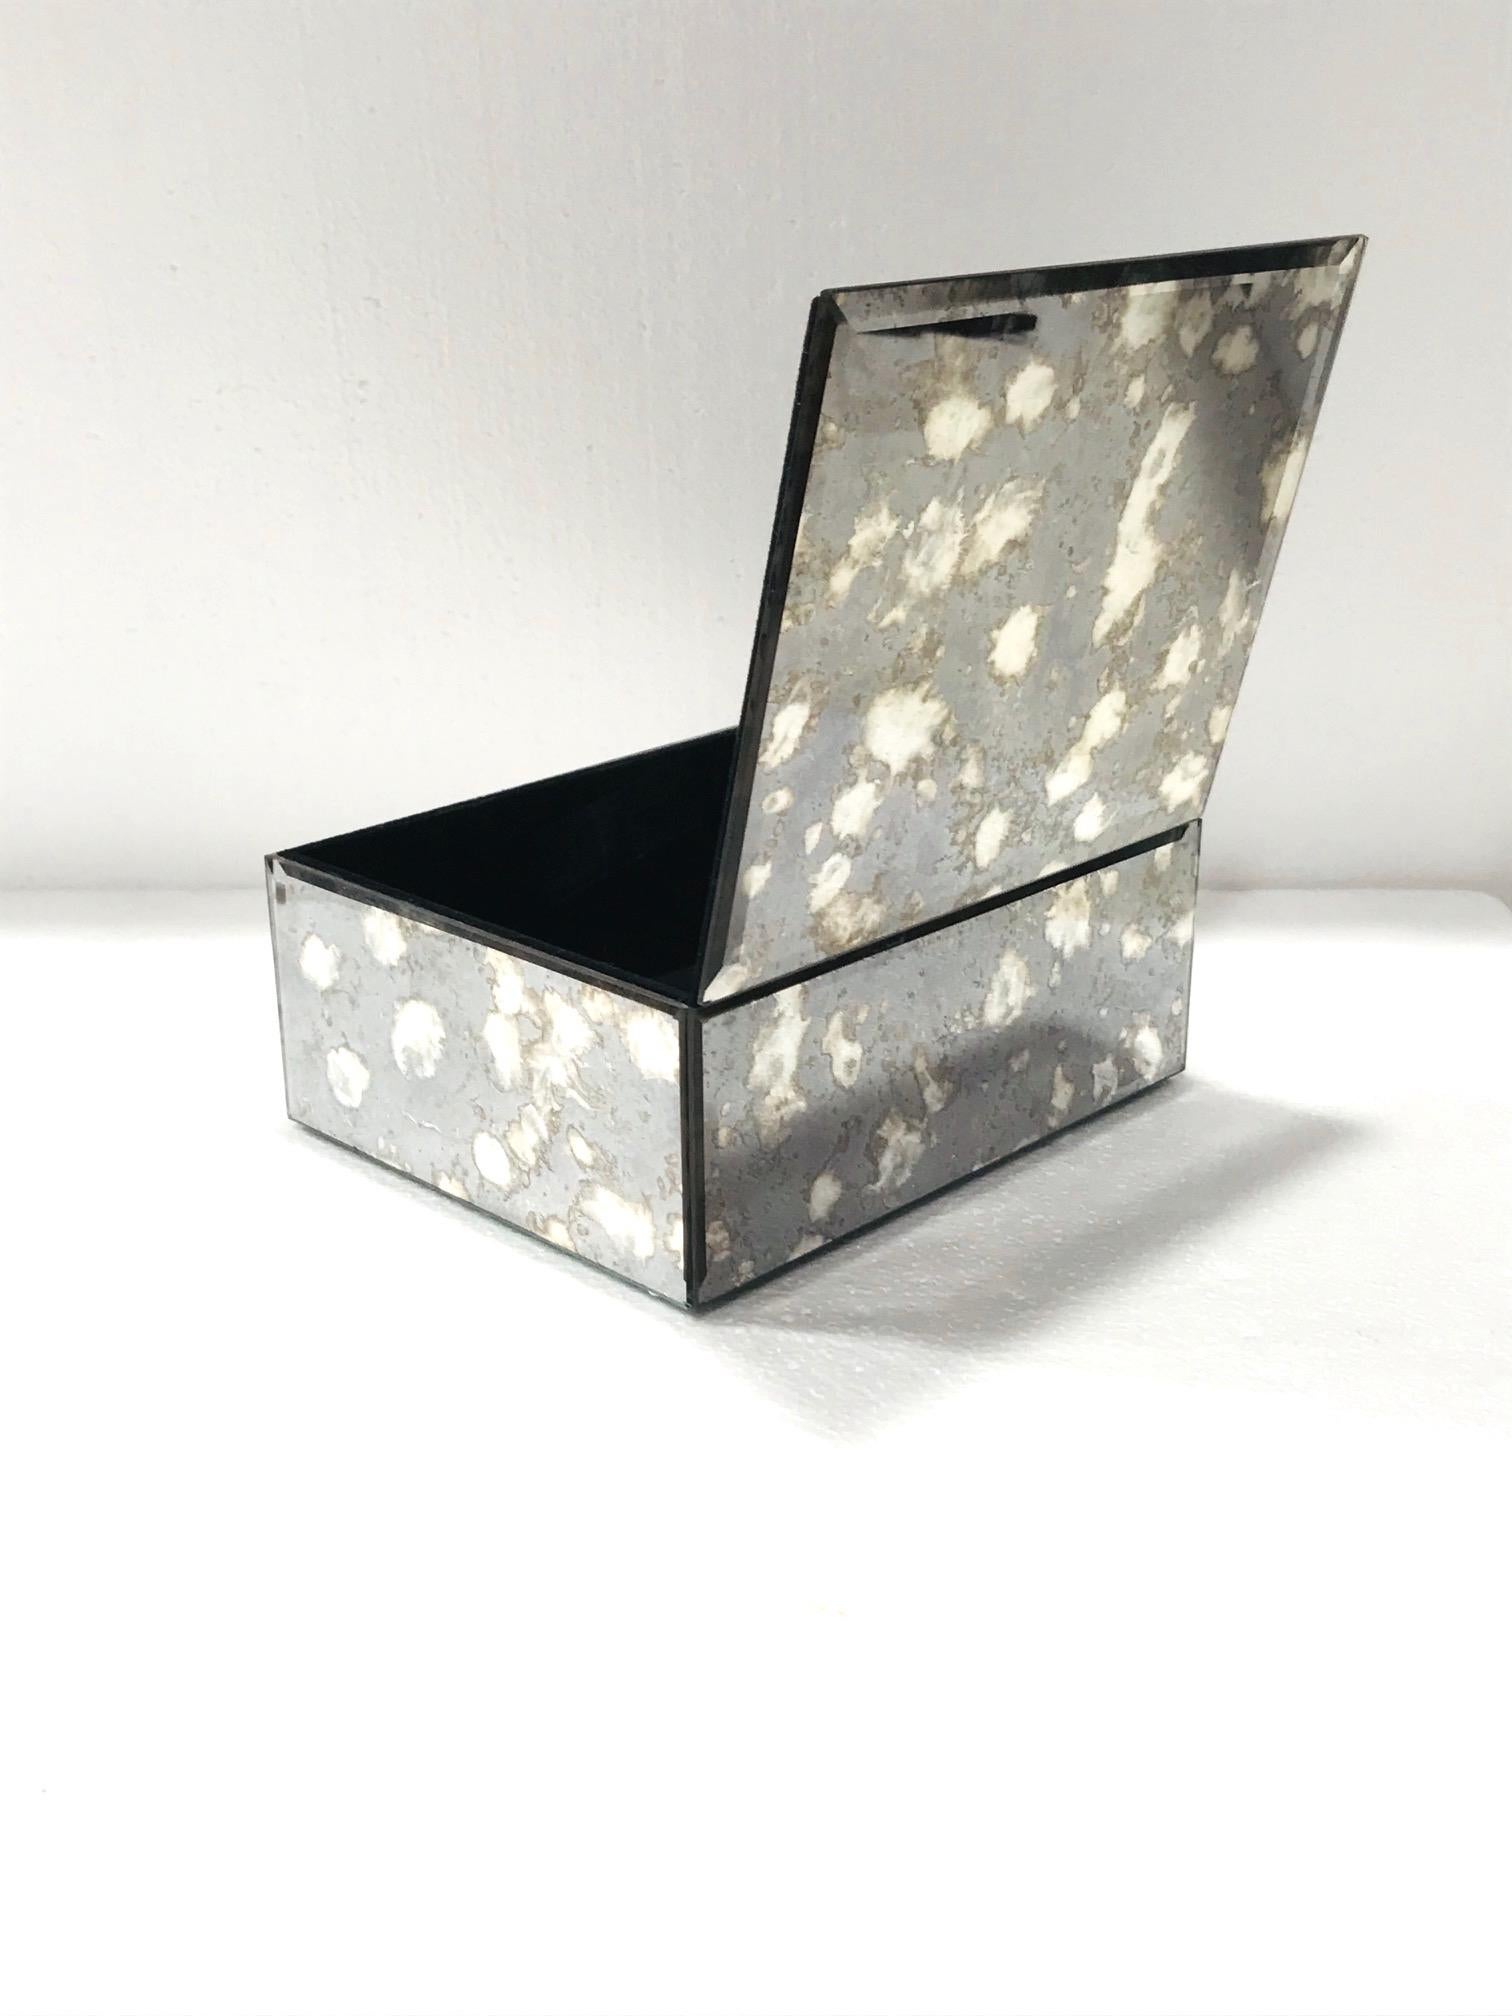 Late 20th Century Vintage Antique Mirrored Jewelry Box in Smoke Grey and Bronze, circa 1990s